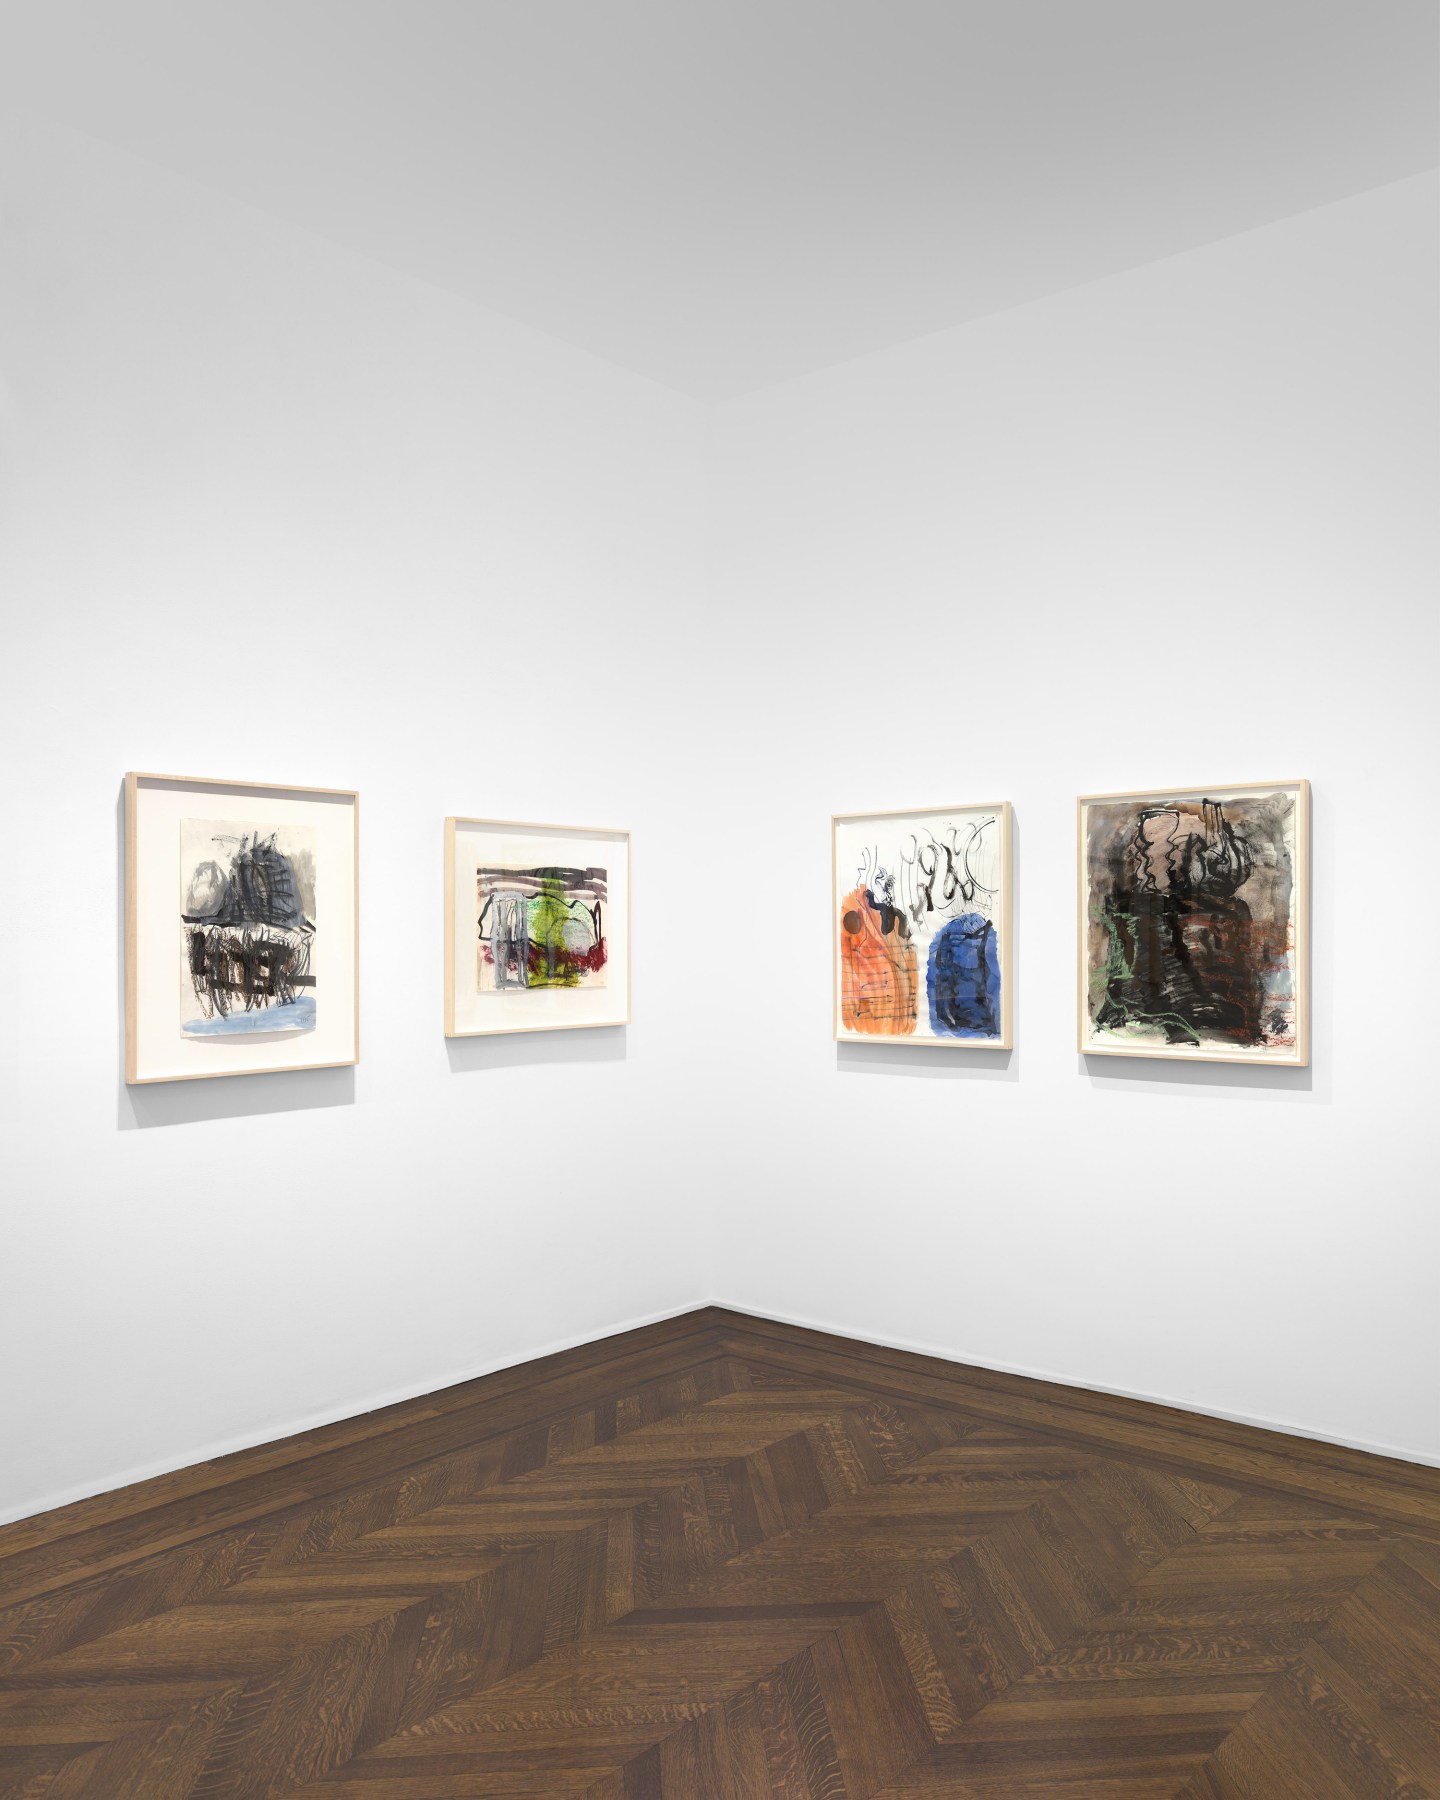 PER KIRKEBY Works on Paper, Works in Brick 20 November 2019 through 25 January 2020 UPPER EAST SIDE, NEW YORK, Installation View 18